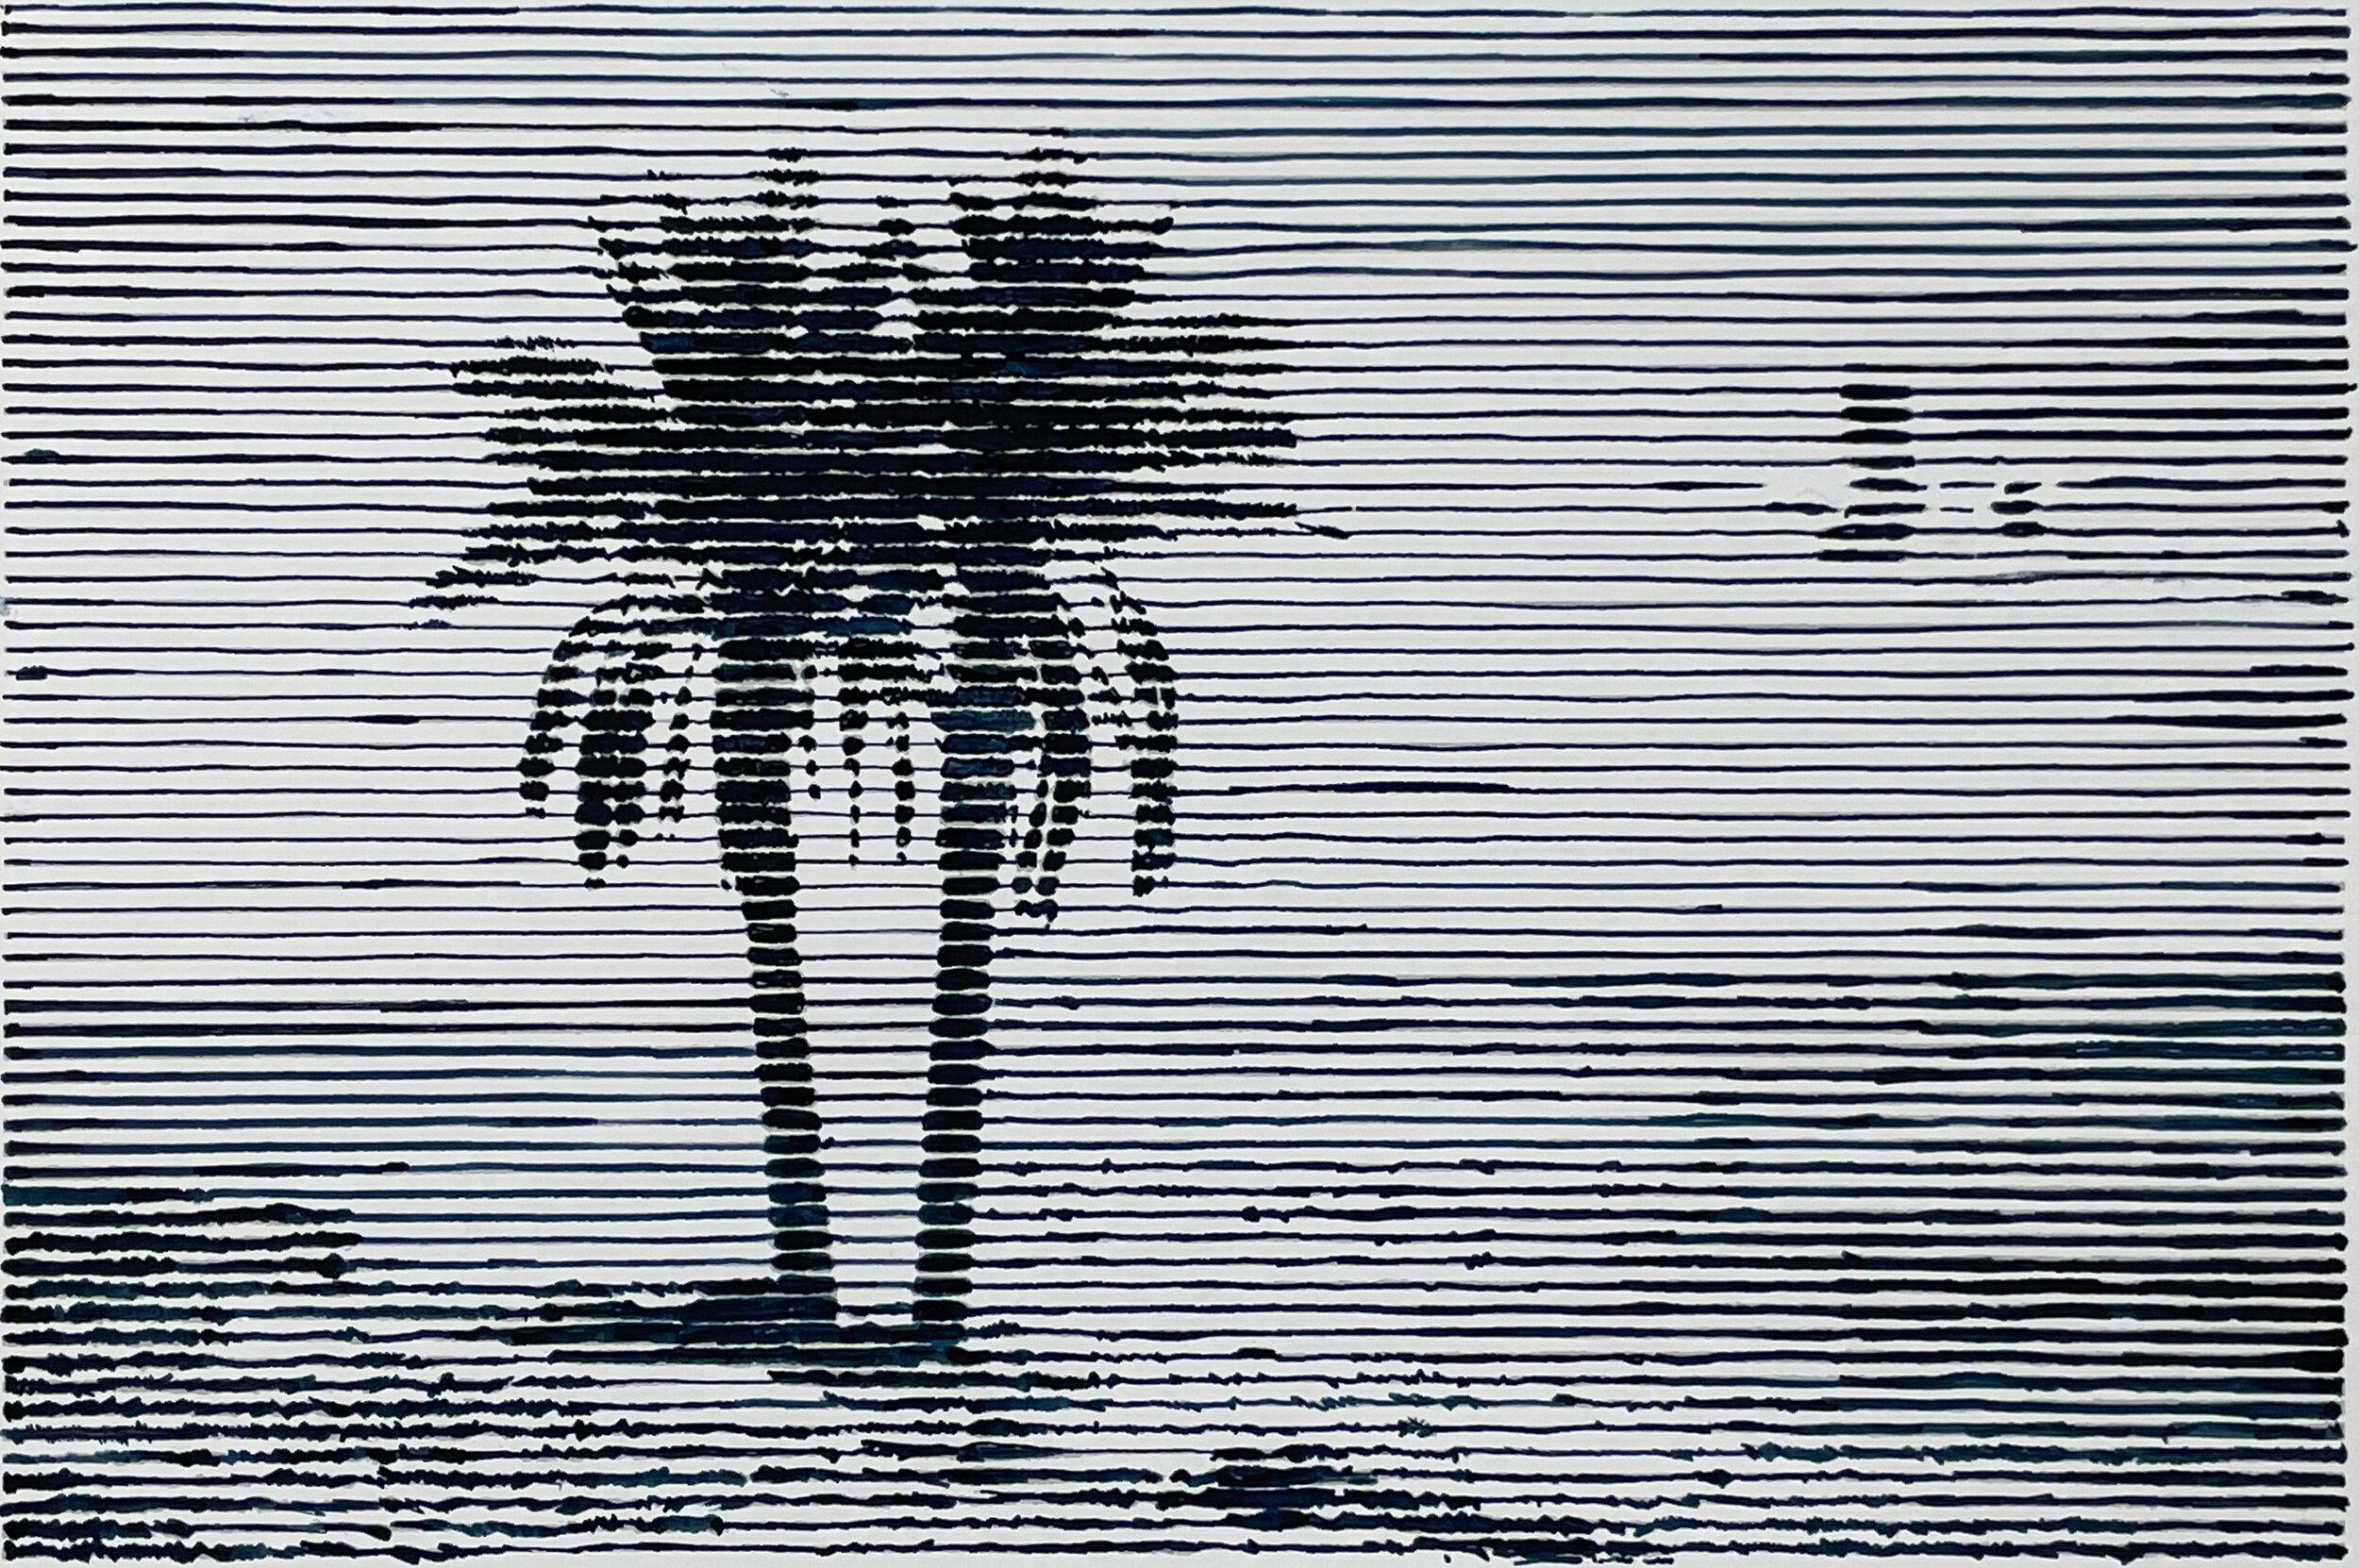 Charles Buckley Still-Life Painting - Mirage/Oasis, black and white painting of a beach with palm trees